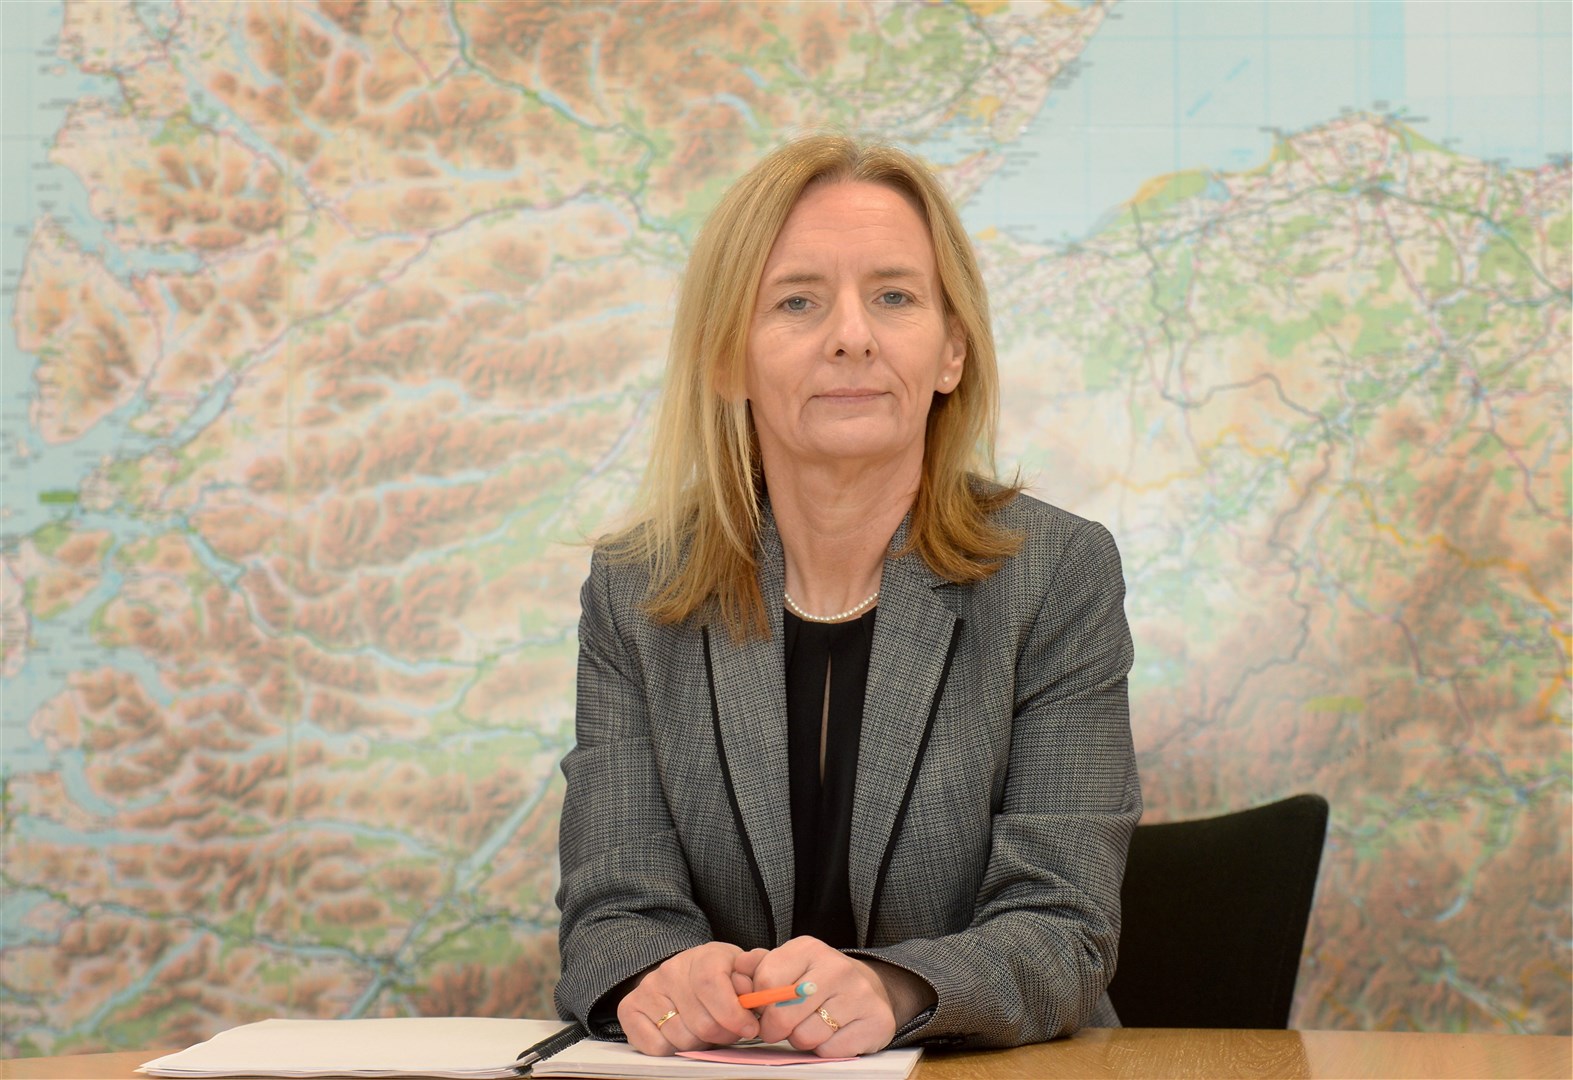 Highland Council is also on the hunt for a new chief executive after Donna Manson announced plans to move on to pastures new. Picture: Gary Anthony.